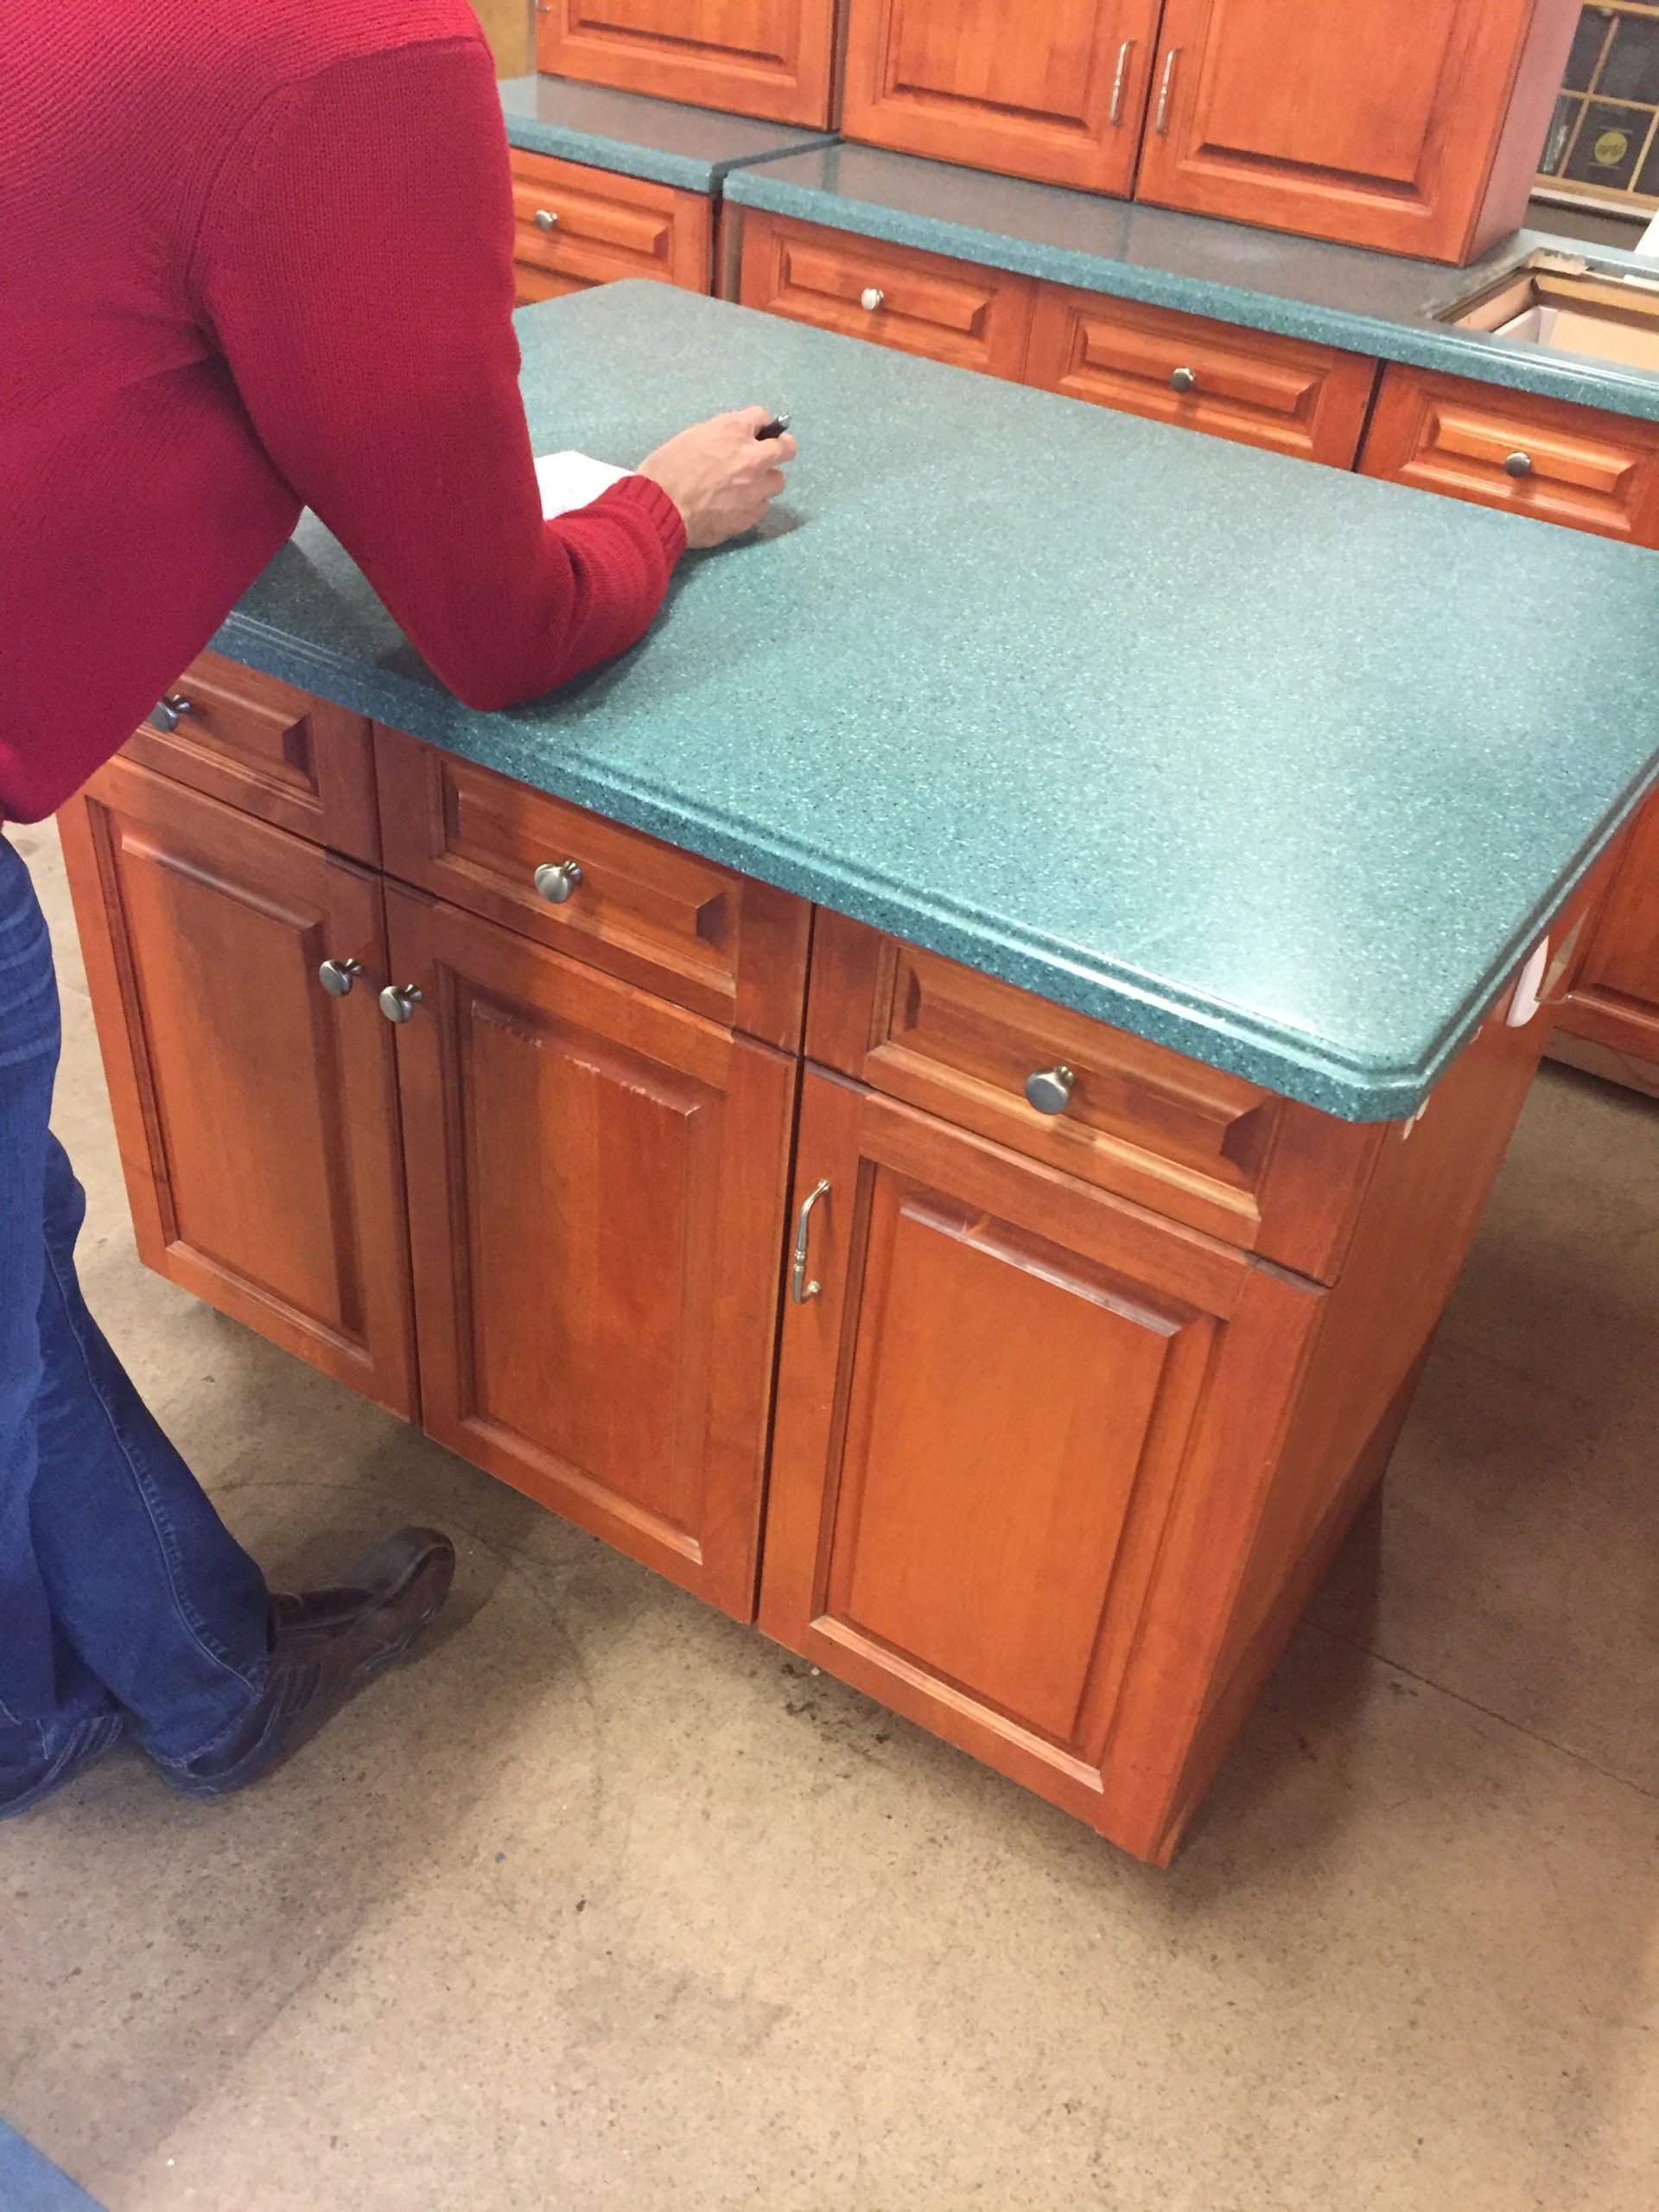 Selling Used Kitchen Cabinets – Make It a Profitable Win/Win!